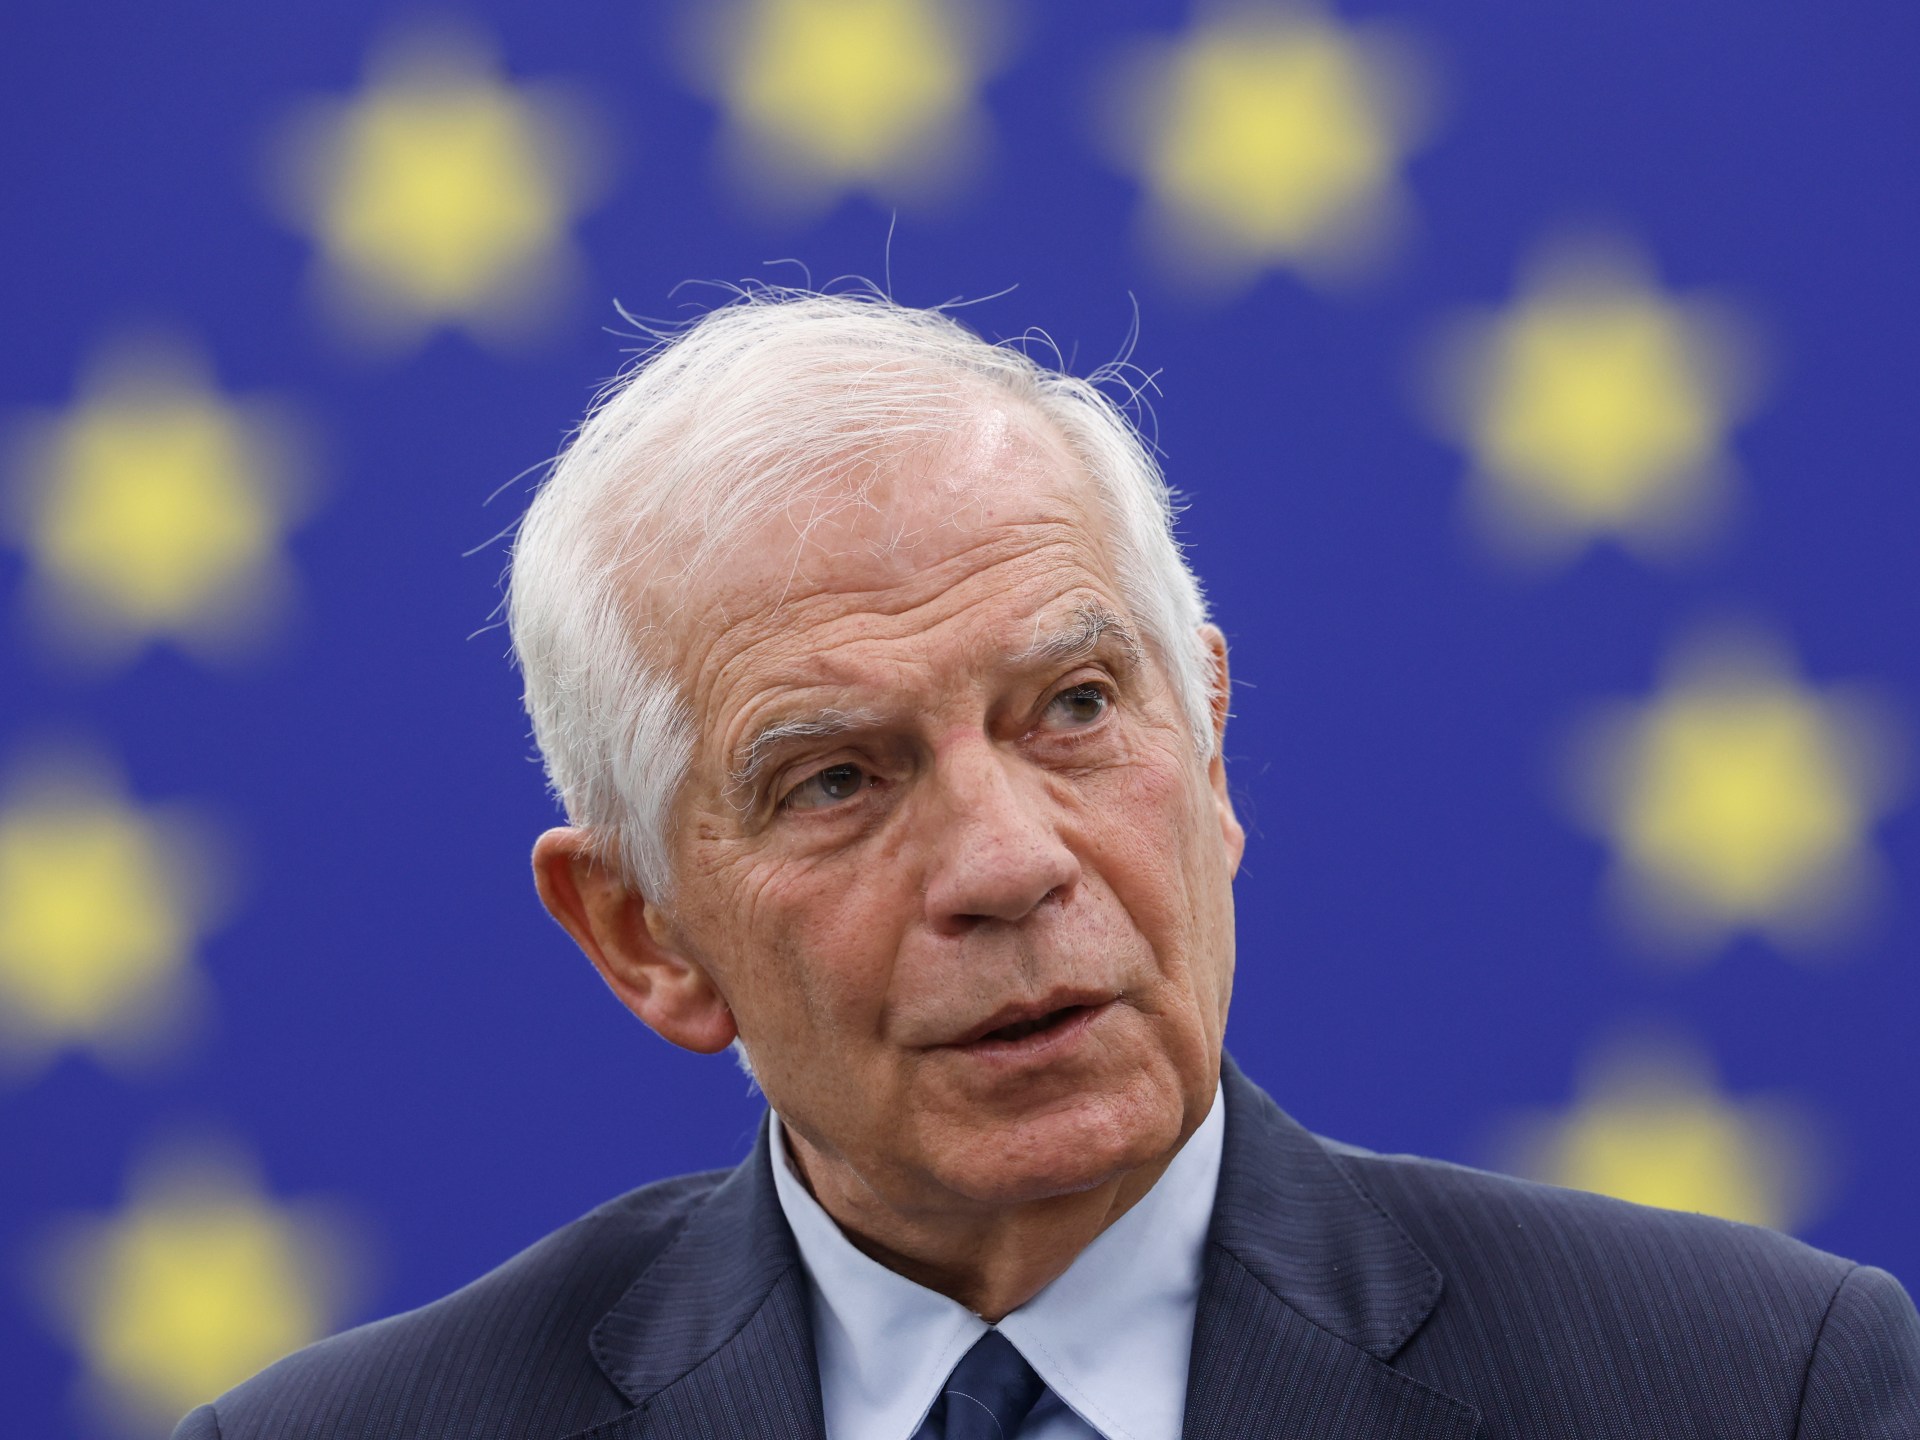 EU’s foreign policy chief Borrell backs pause in Israel-Hamas war | Israel-Palestine conflict News